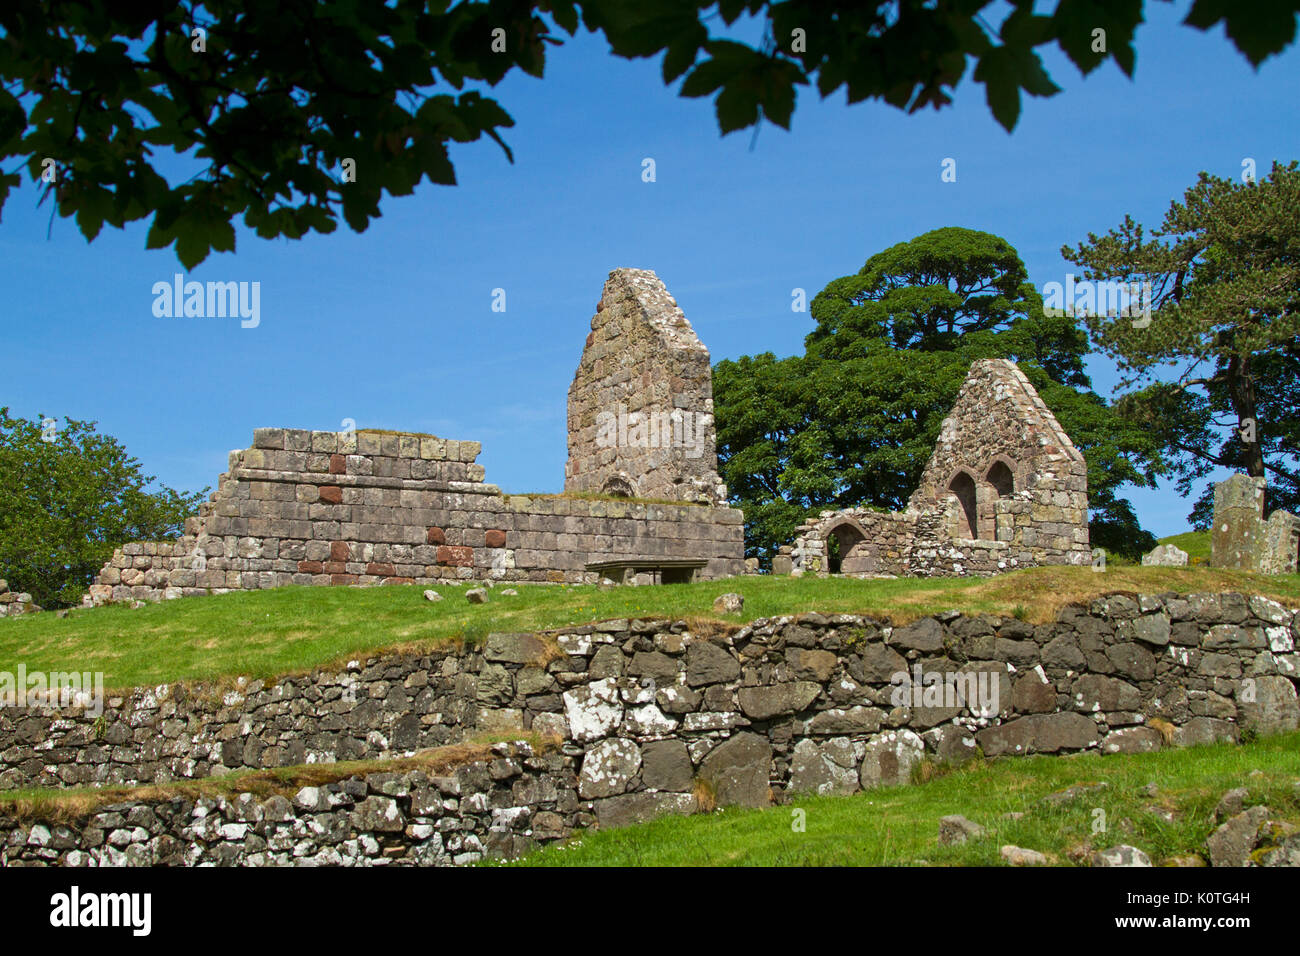 Ruins of historic 13th century Saint Blane's church and monastery against blue sky on island of Bute, Scotland Stock Photo